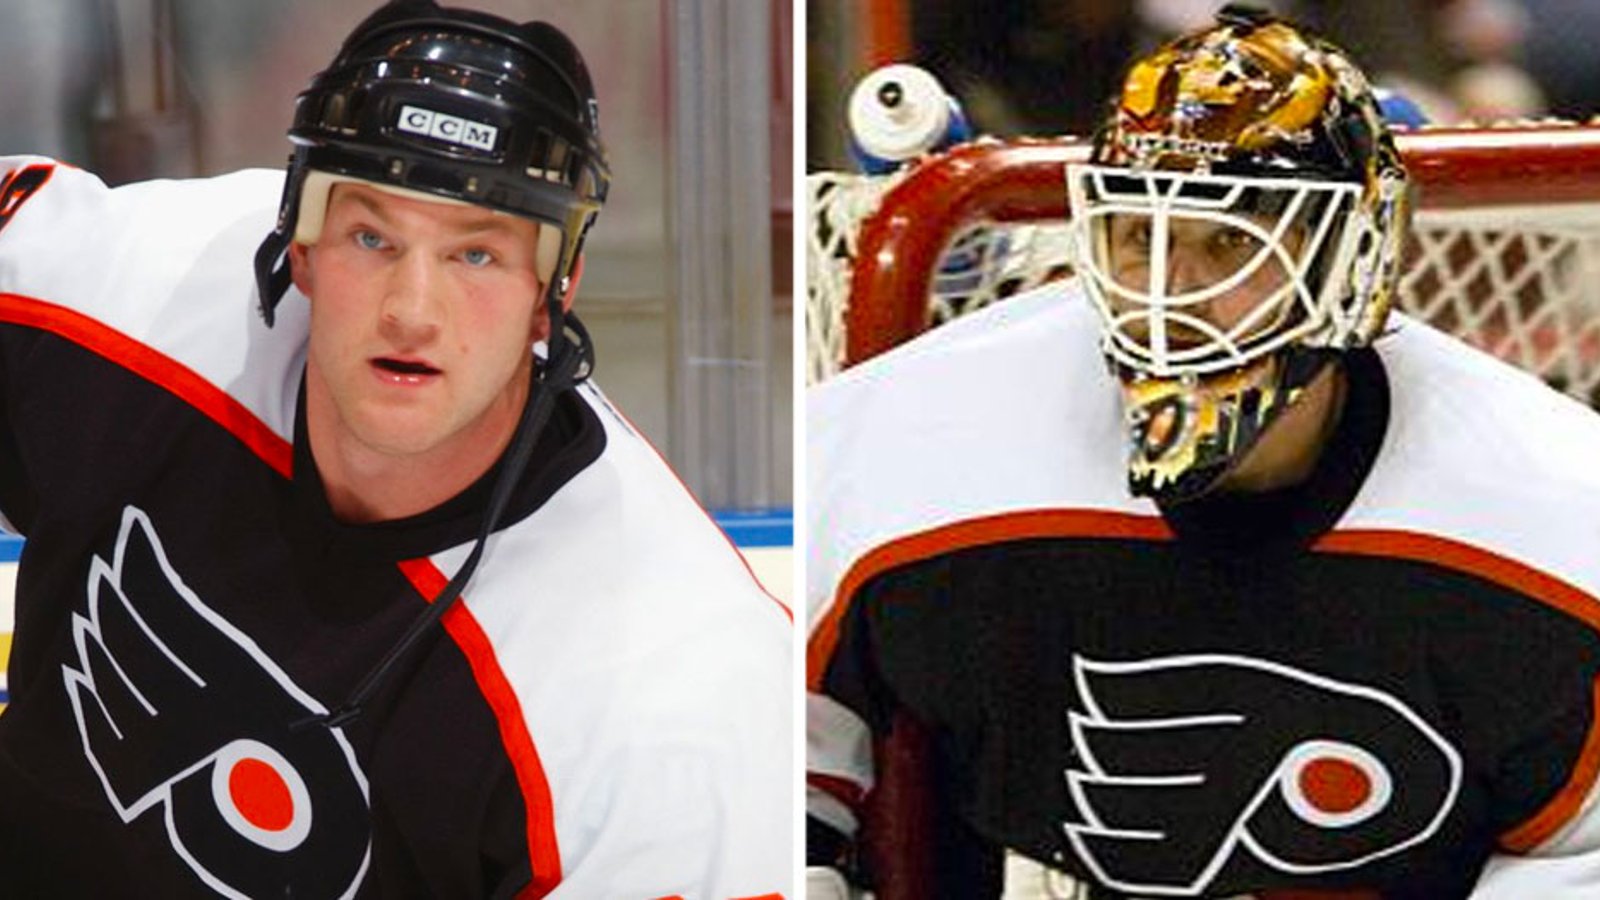 How Flyers Fedoruk and Esche almost blew up their house deep frying a turkey